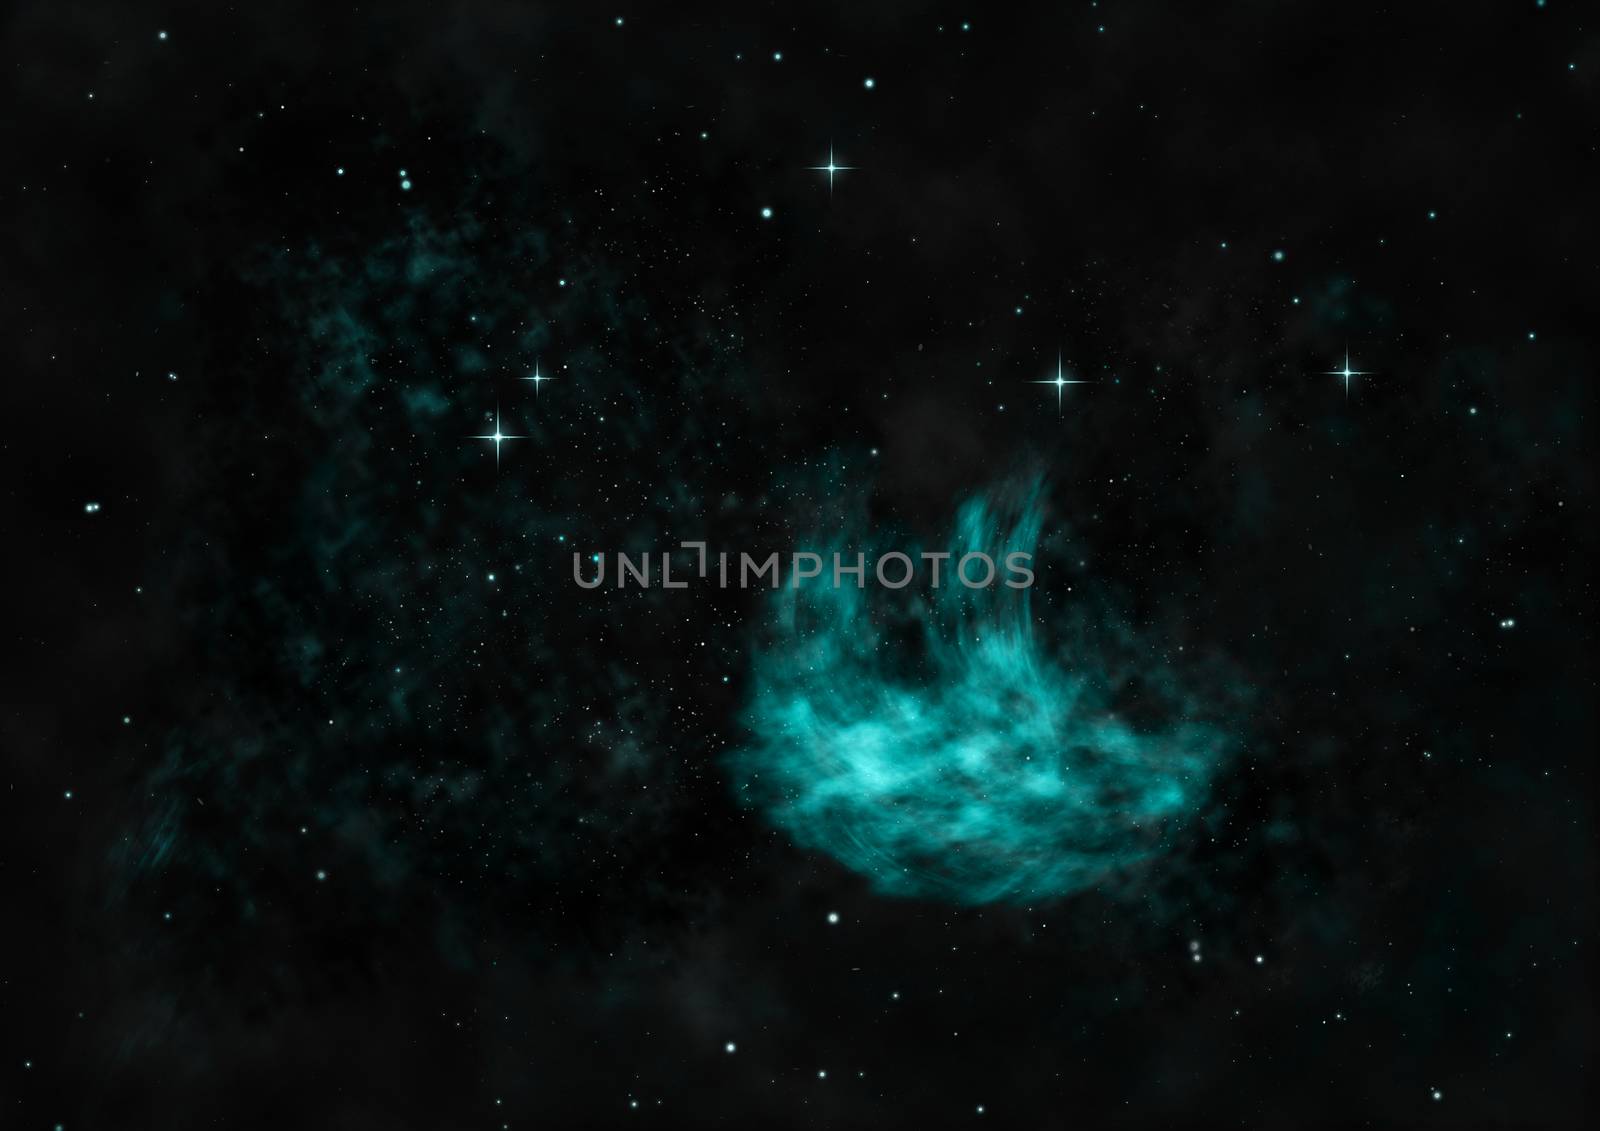 Small part of an infinite star field. 3D rendering by richter1910